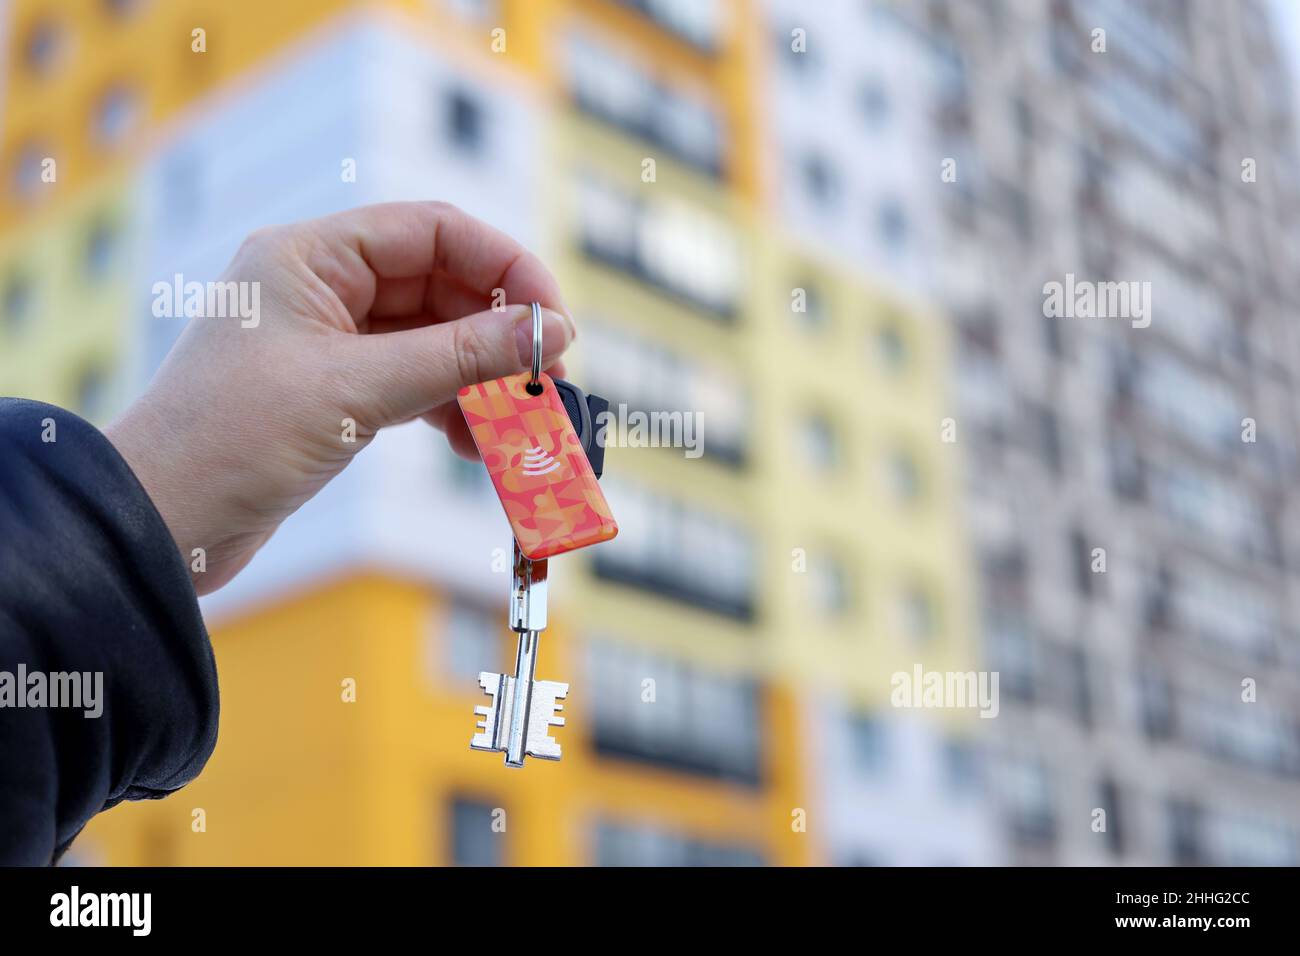 House purchase in winter, woman holding house keys on background of new apartment building. Real estate agent, moving home or renting property Stock Photo